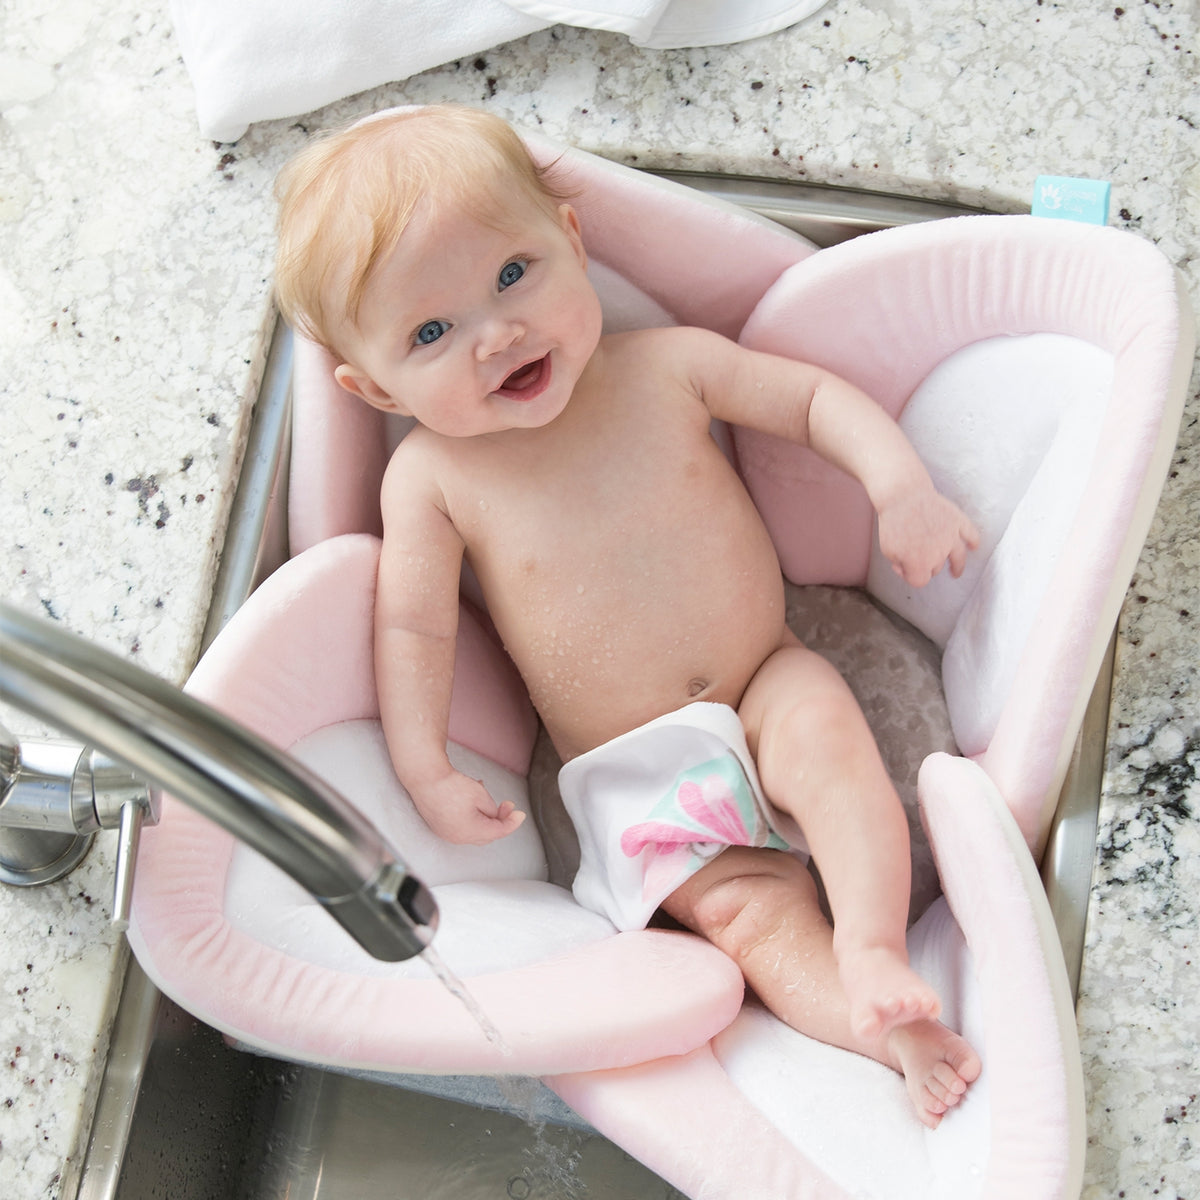 These 6 products will make bath time safe and fun for your baby